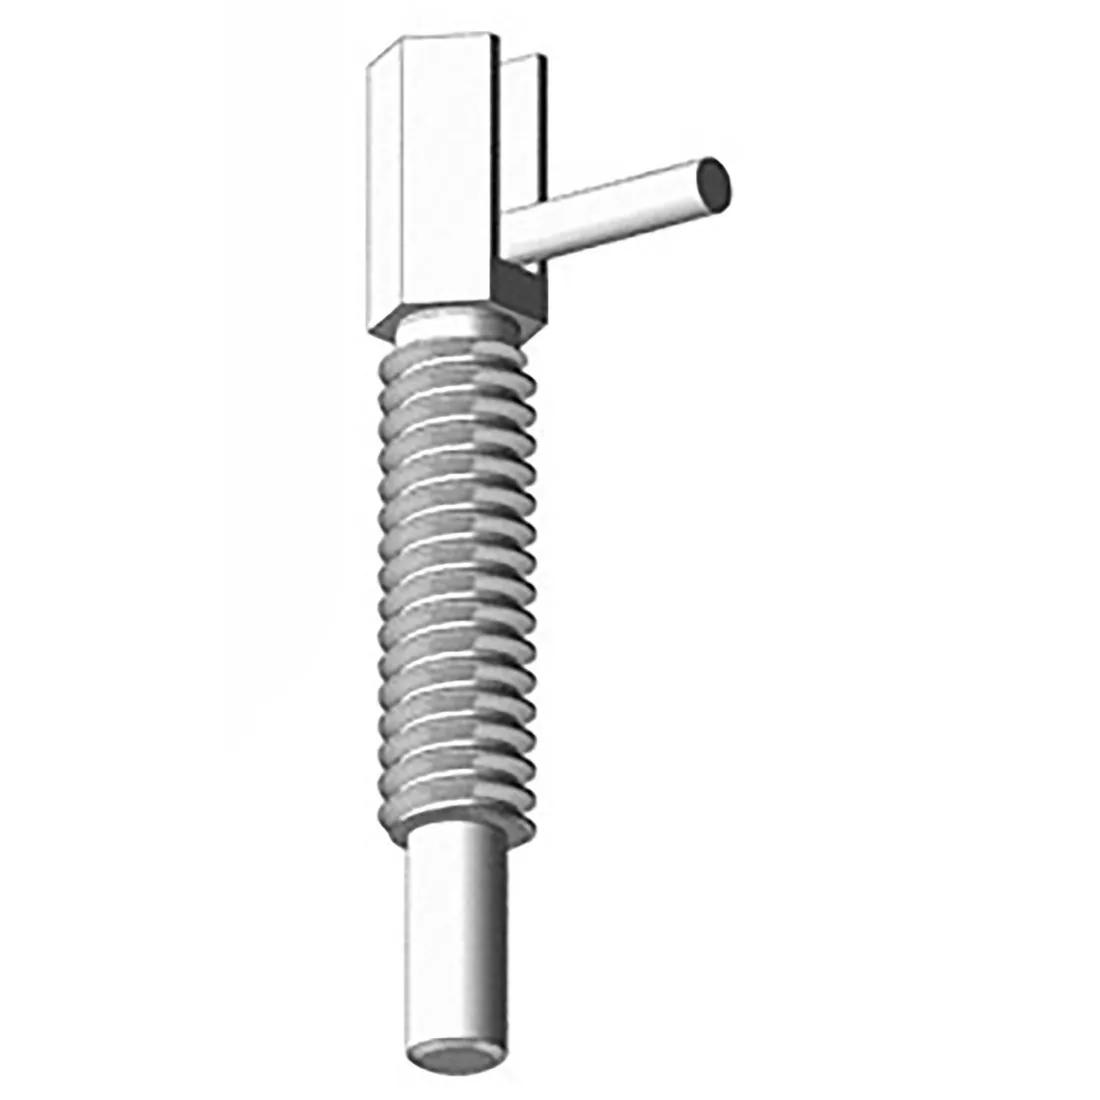 Lever Handle Plunger Pins